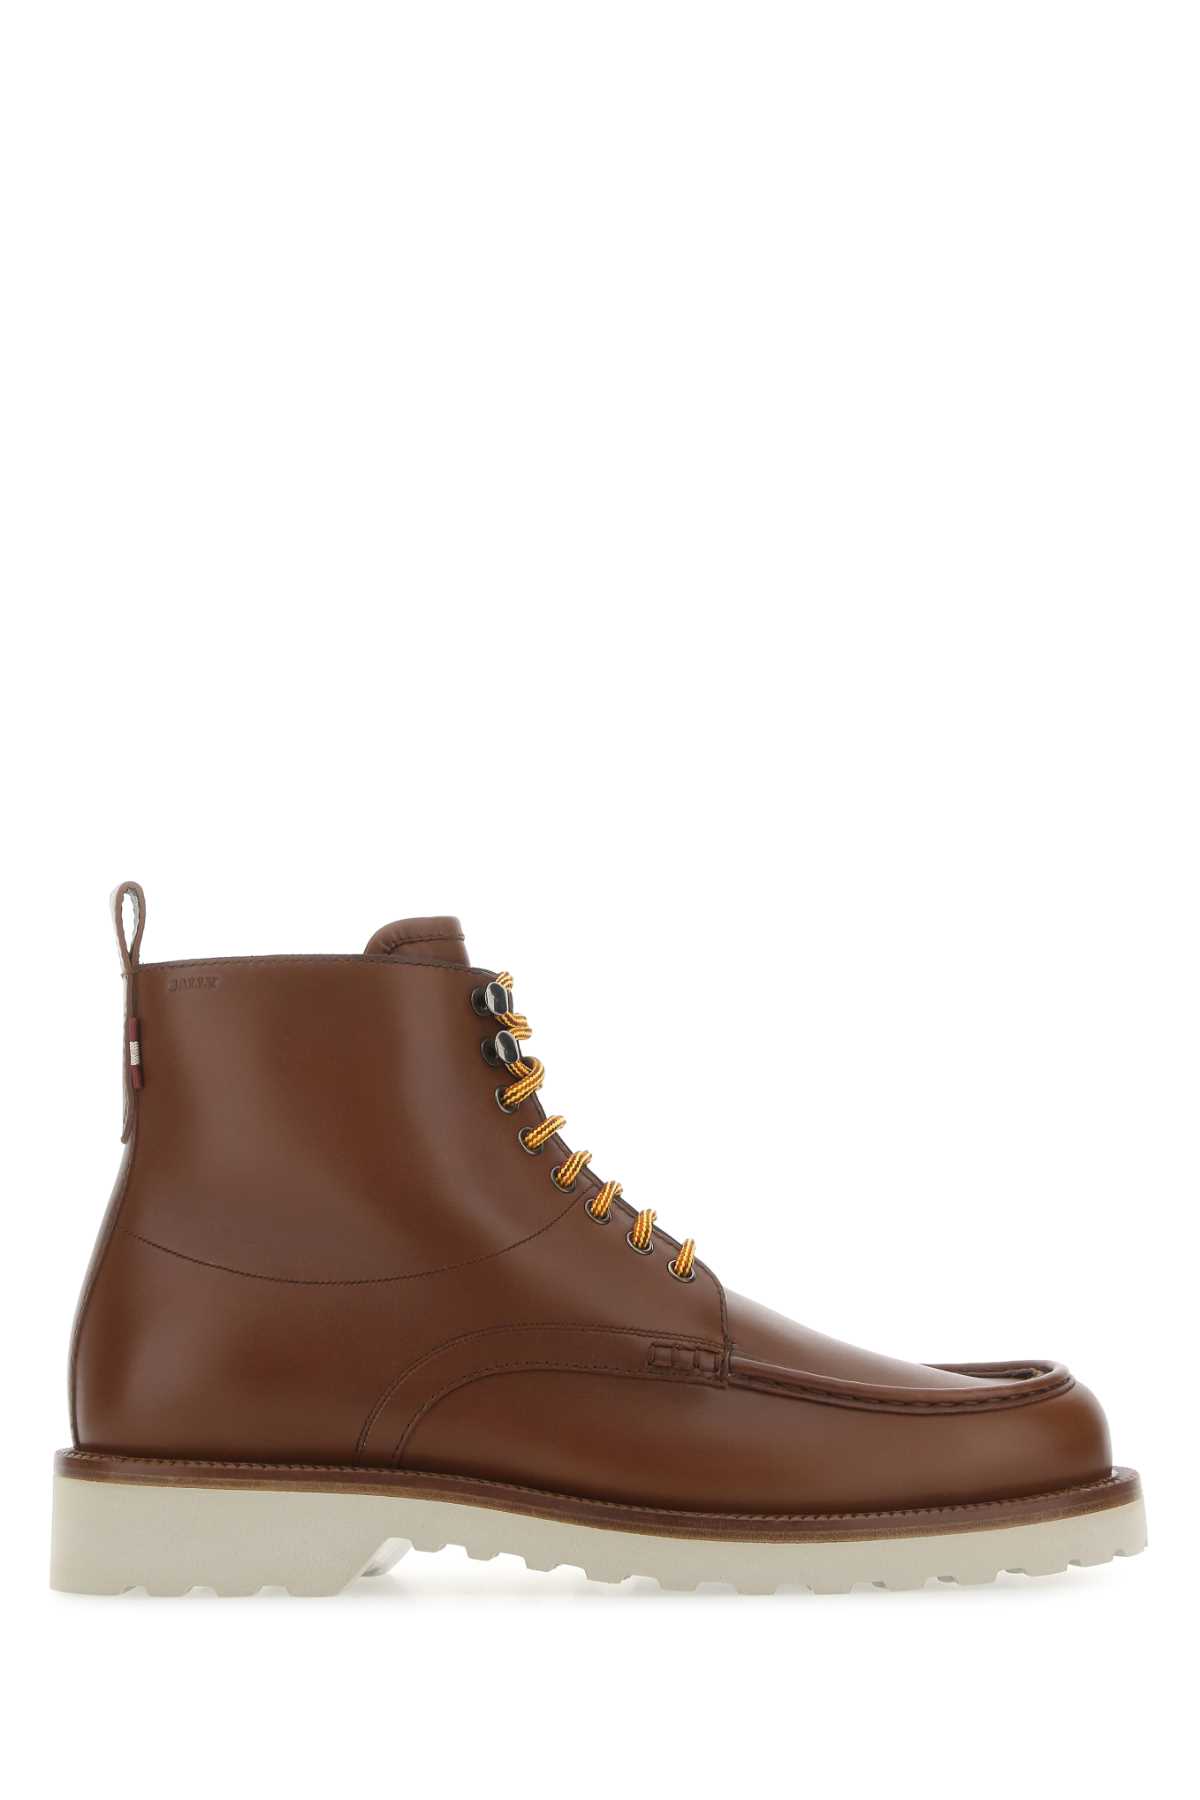 Bally Brown Leather Nobilus Ankle Boots